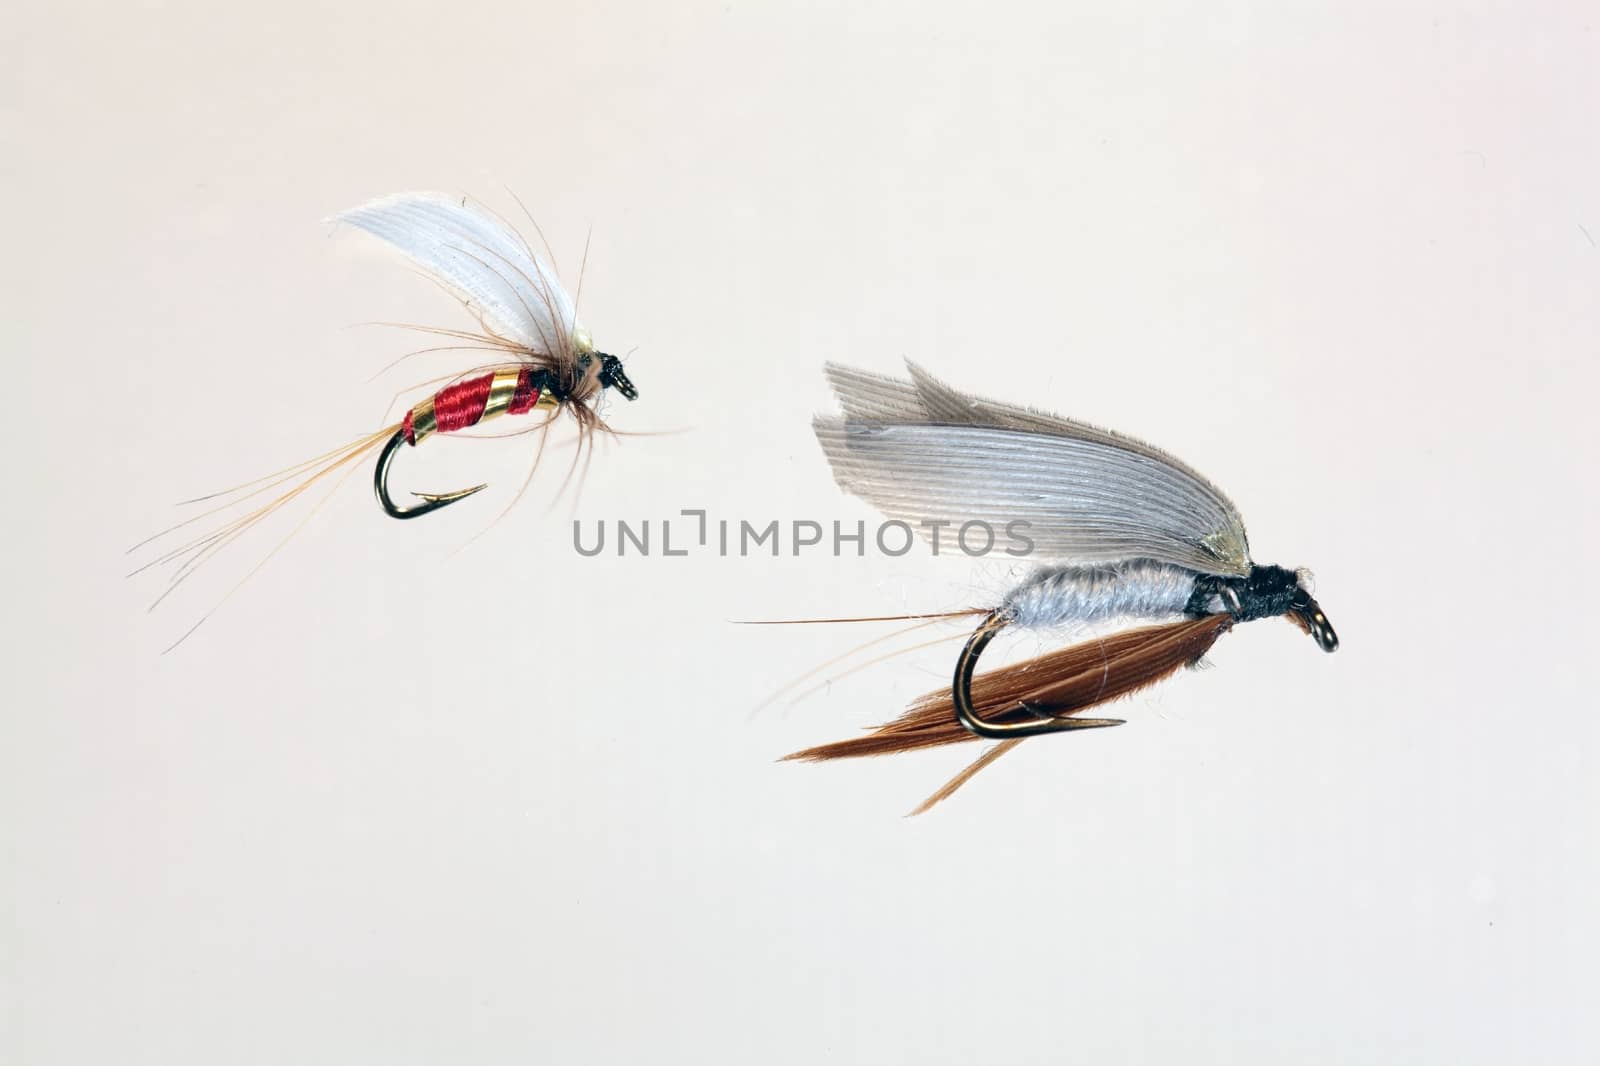 Macro photo of an artificial fly for fly fishing.